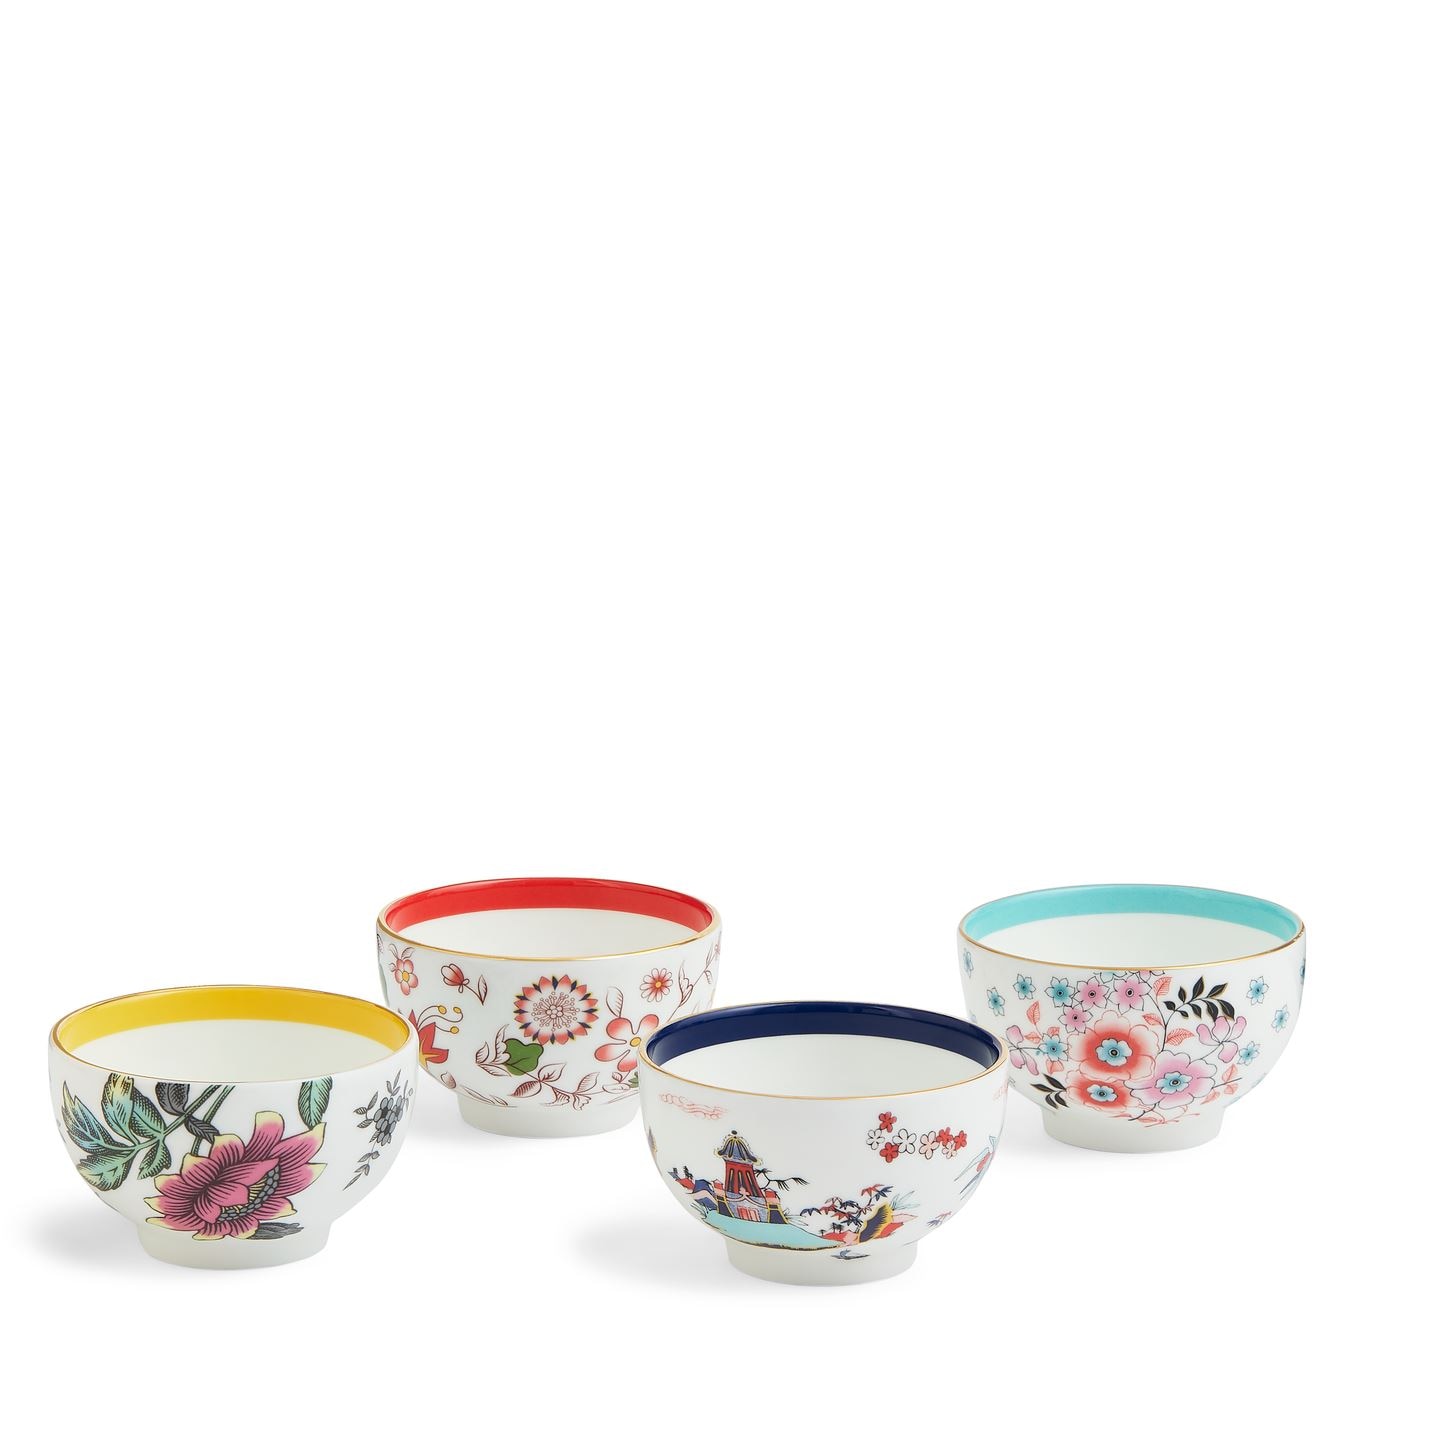 From wedgwood.com